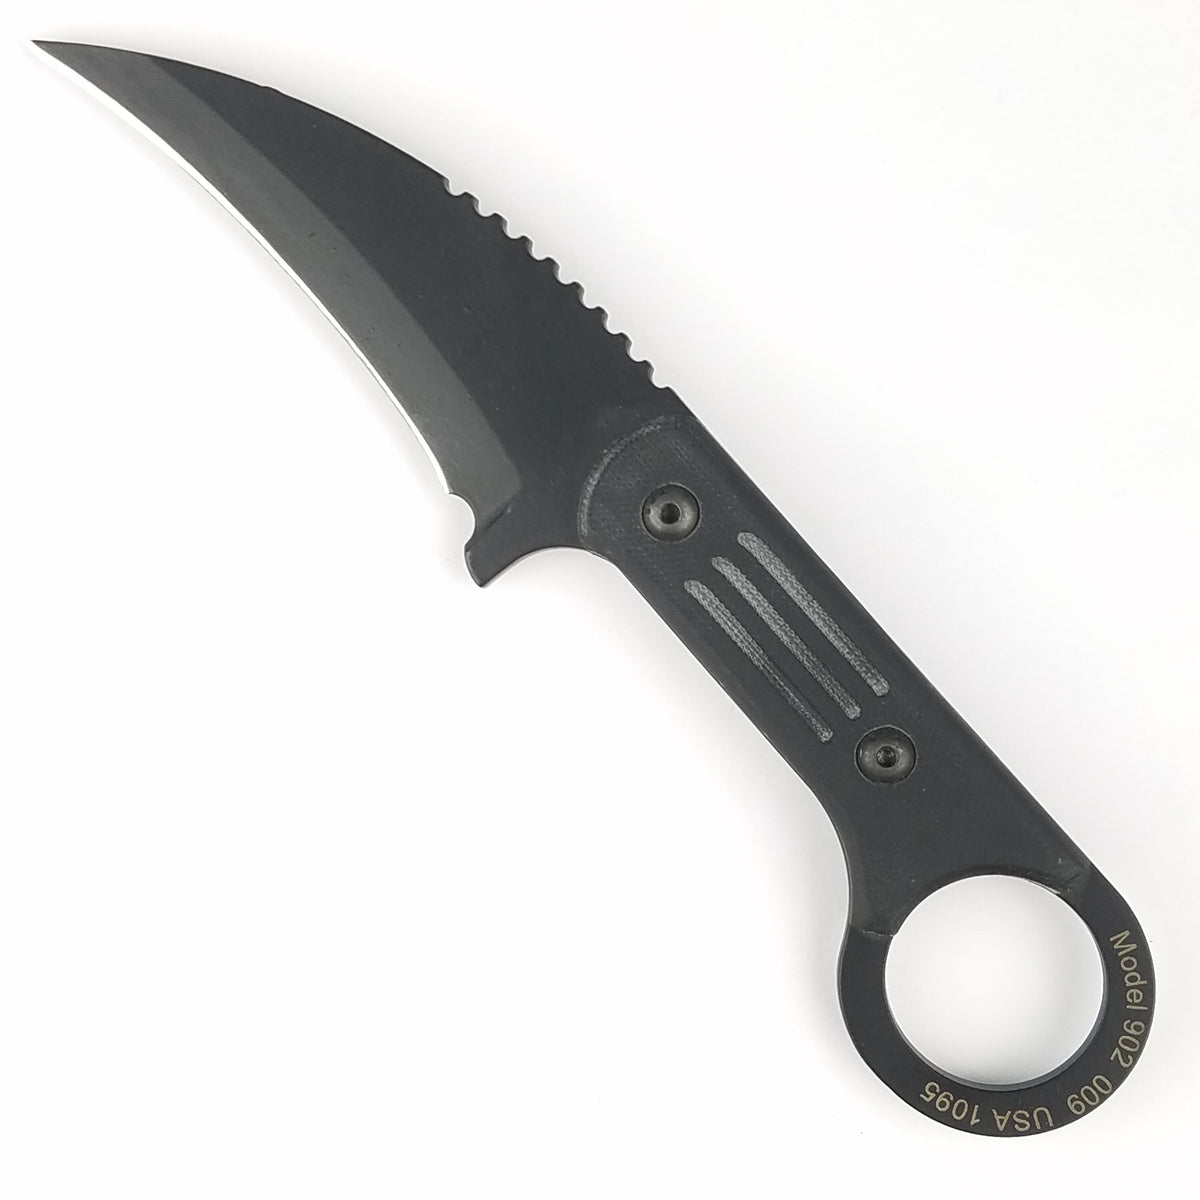 Jason Perry Blade Works Tactical Karambit Jade (4) for Sale $199.00